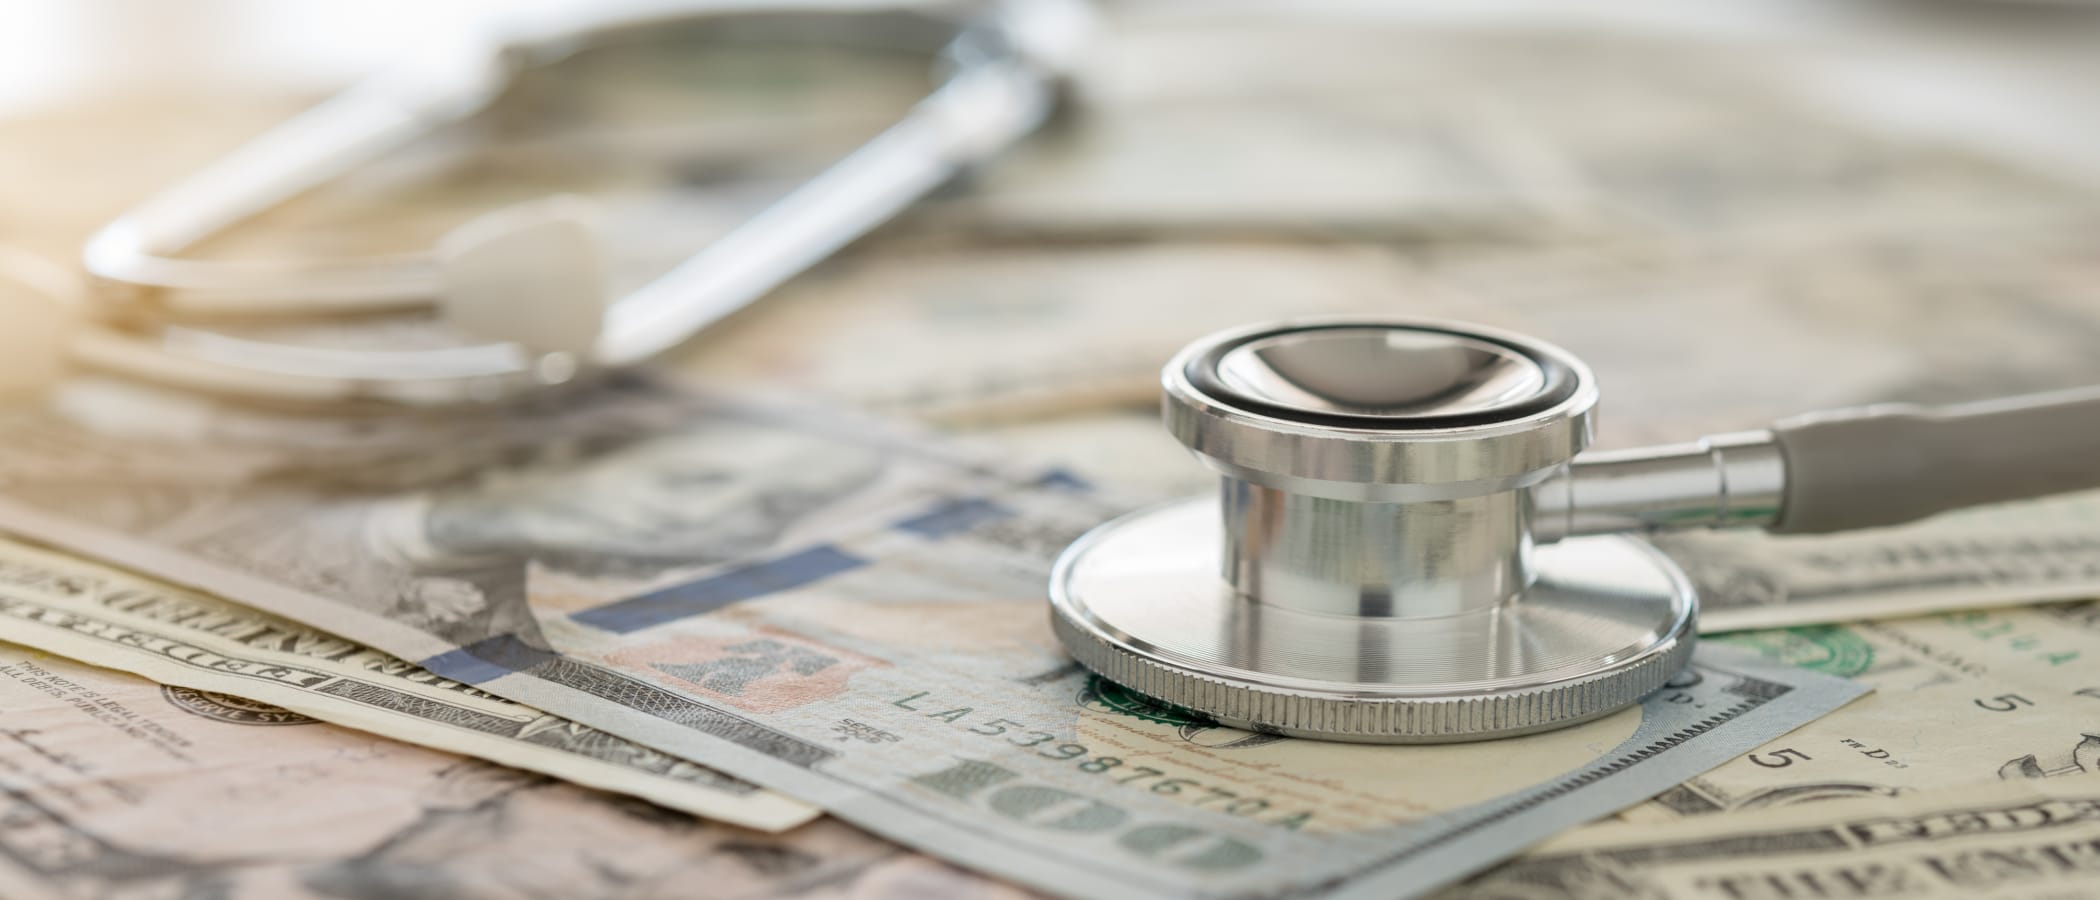 Play or Pay: Rising Penalties' Role in Complying with the ACA